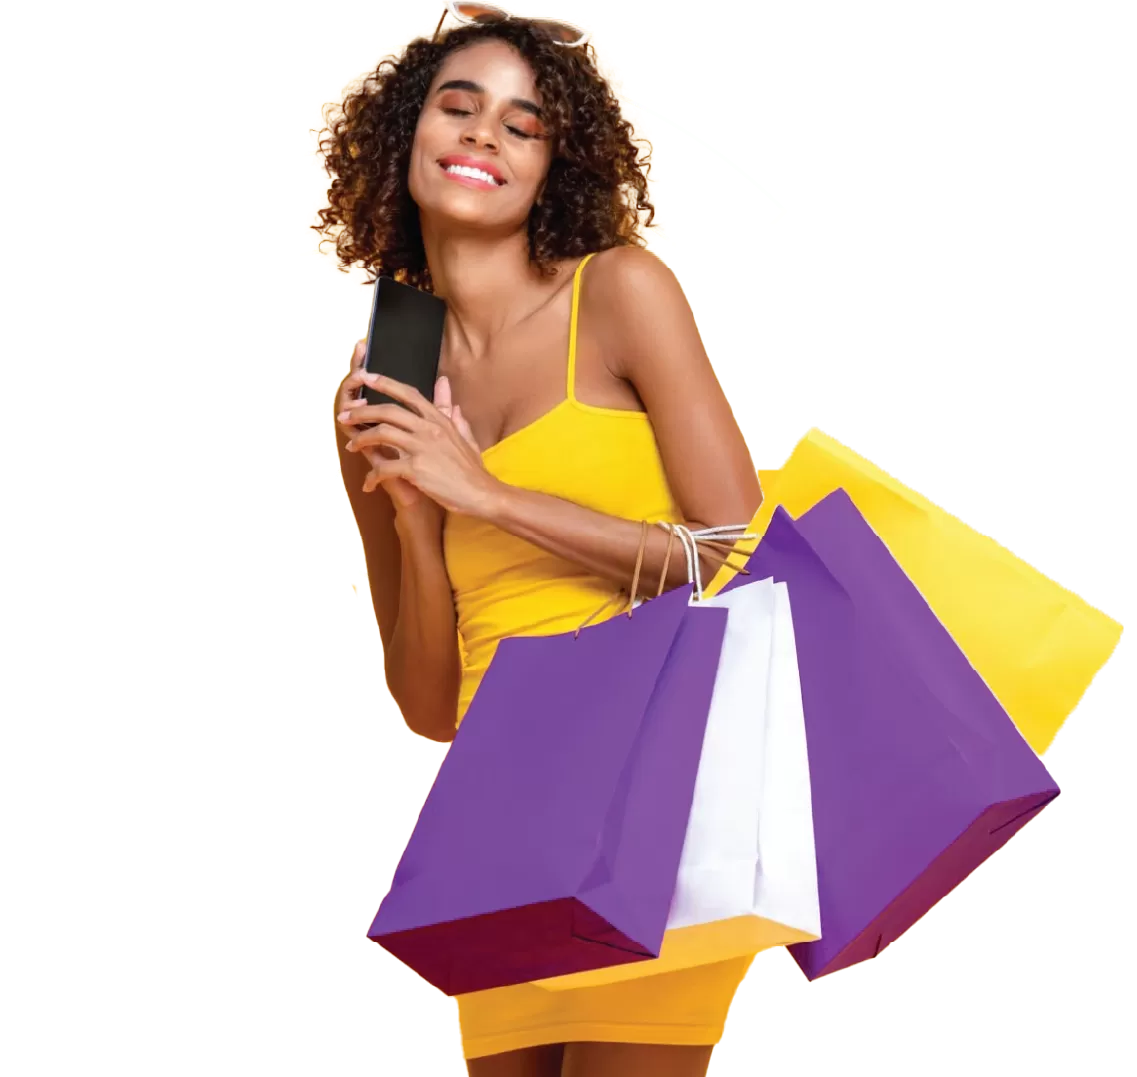 Shopping lady going wireless